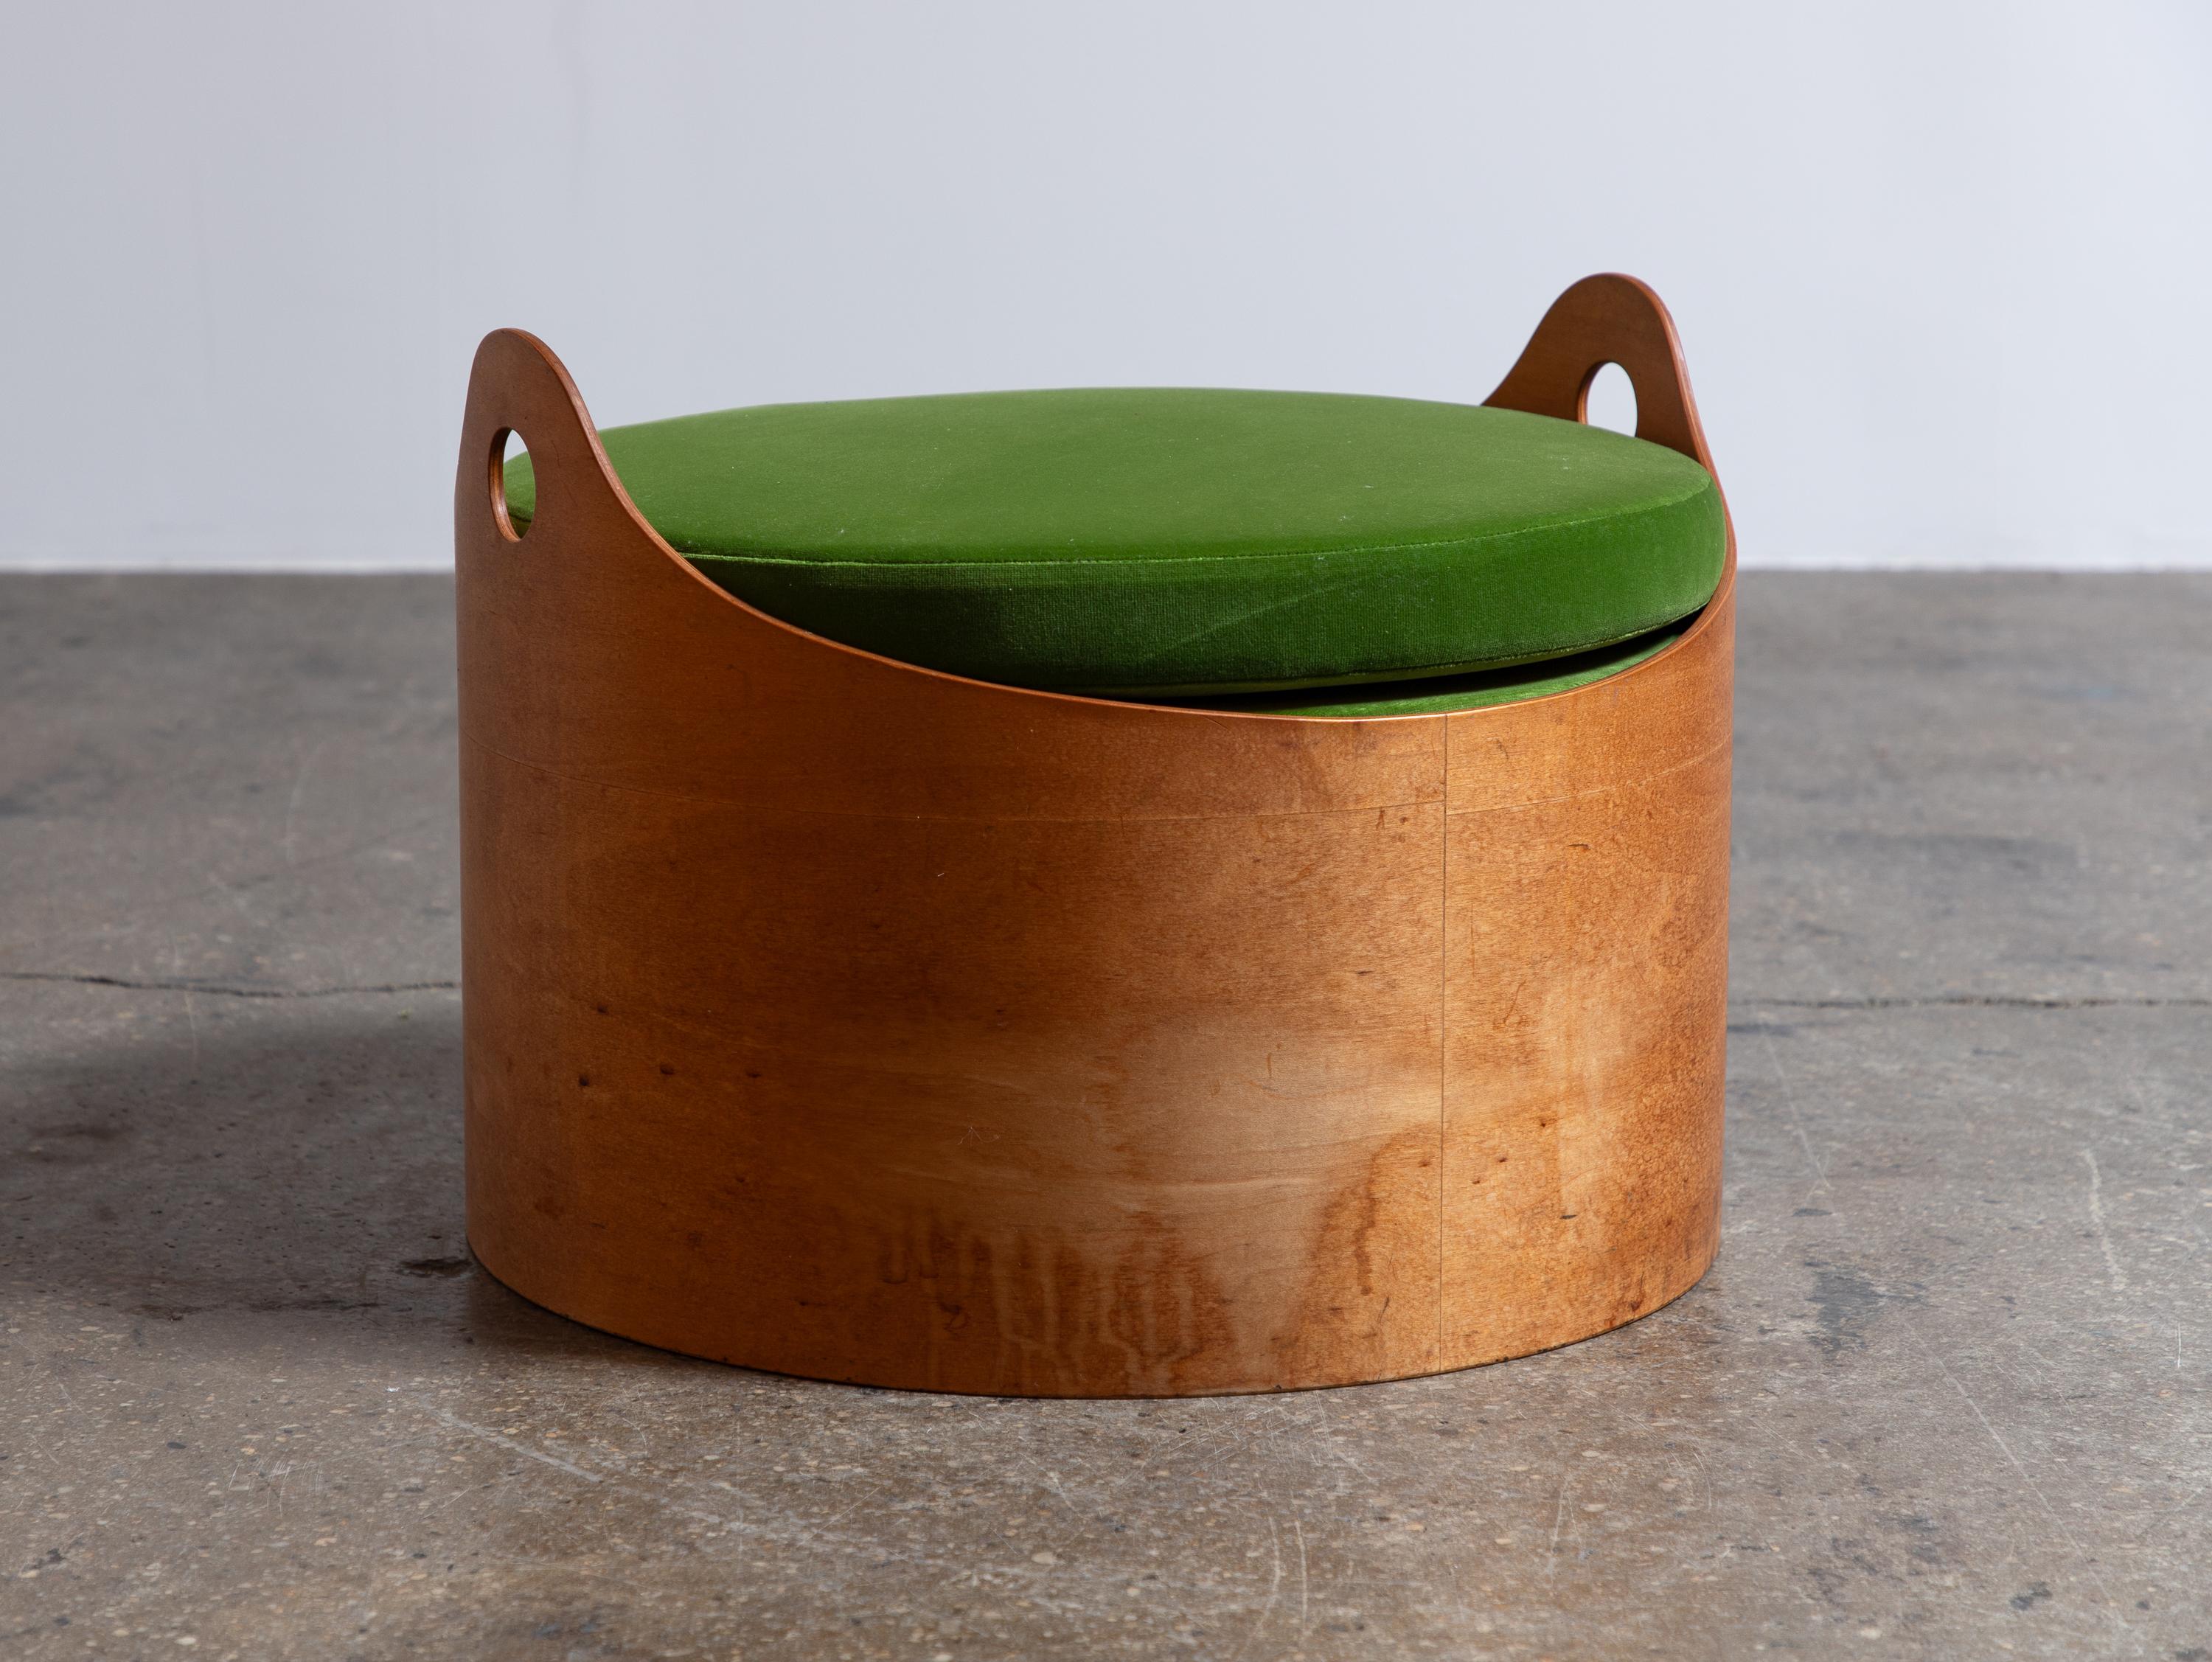 Modernist bent ottoman with velvet cushion, designed by architect Leandre Poisson. The ottoman is comprised of a curved plywood base finished with two charming handles. We added a loose round cushion in grass green cotton velvet. This example is